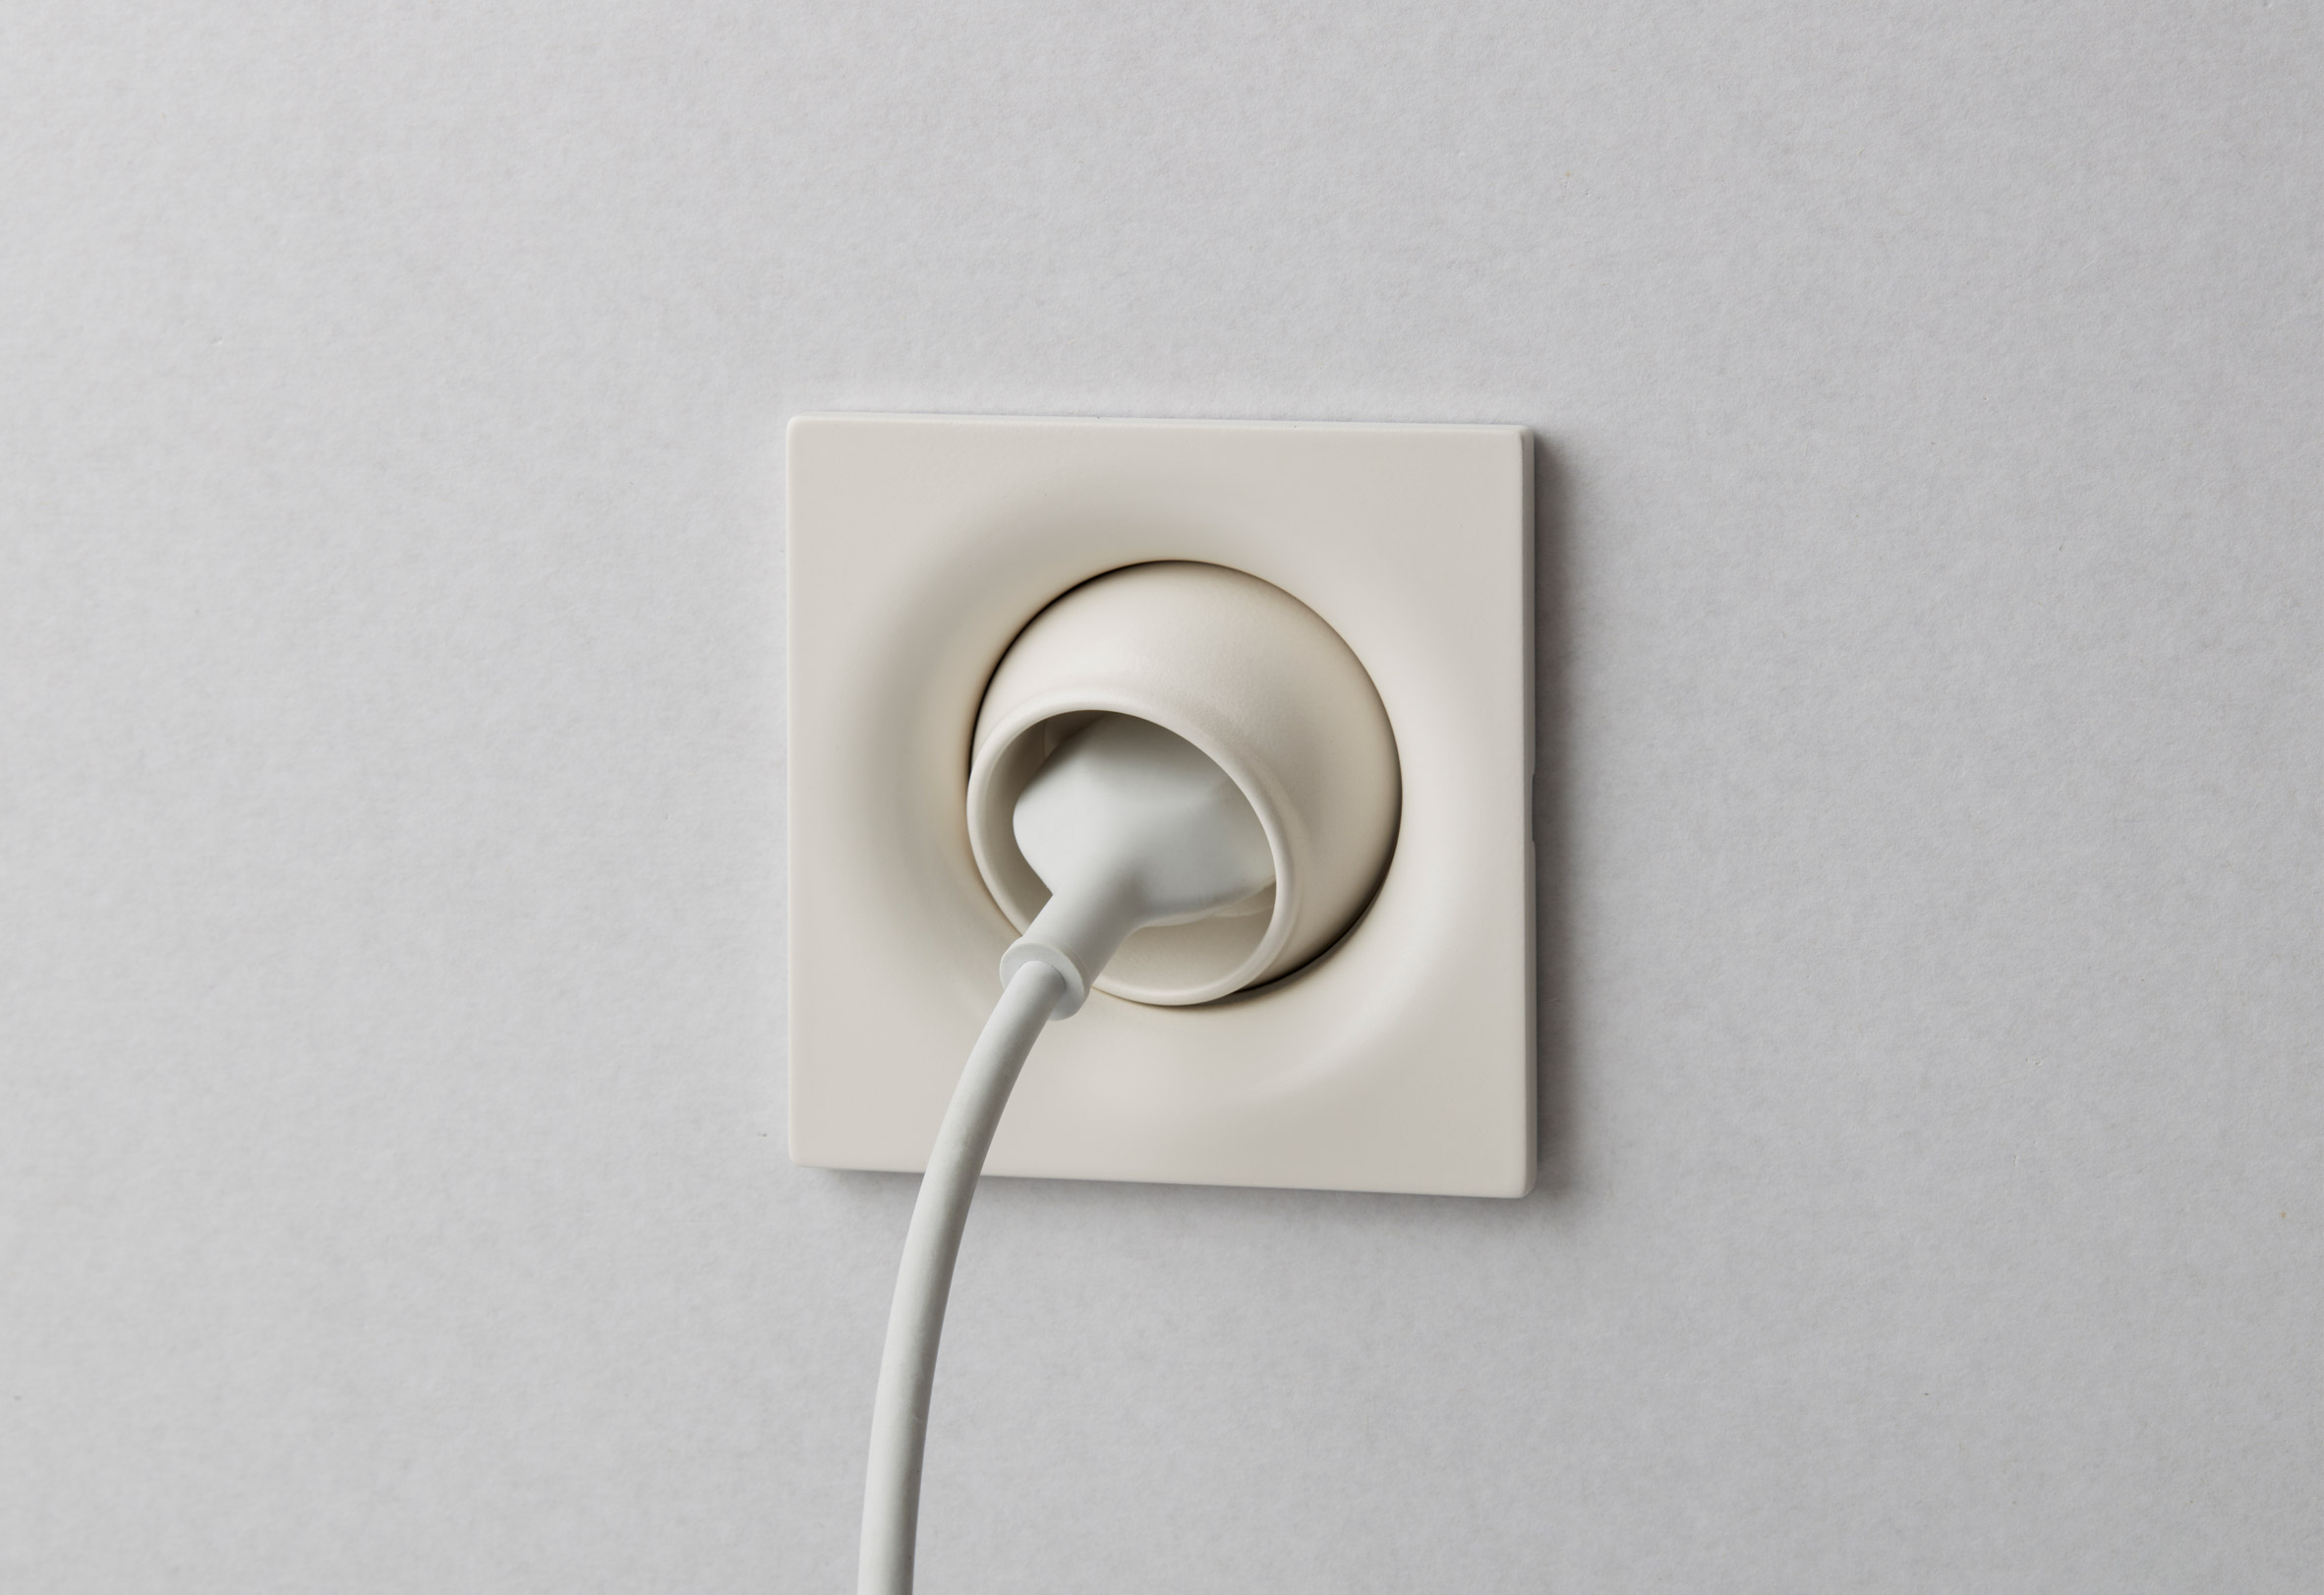 Souhaïb Ghanmi uses animal bones to form Elos sockets and switches